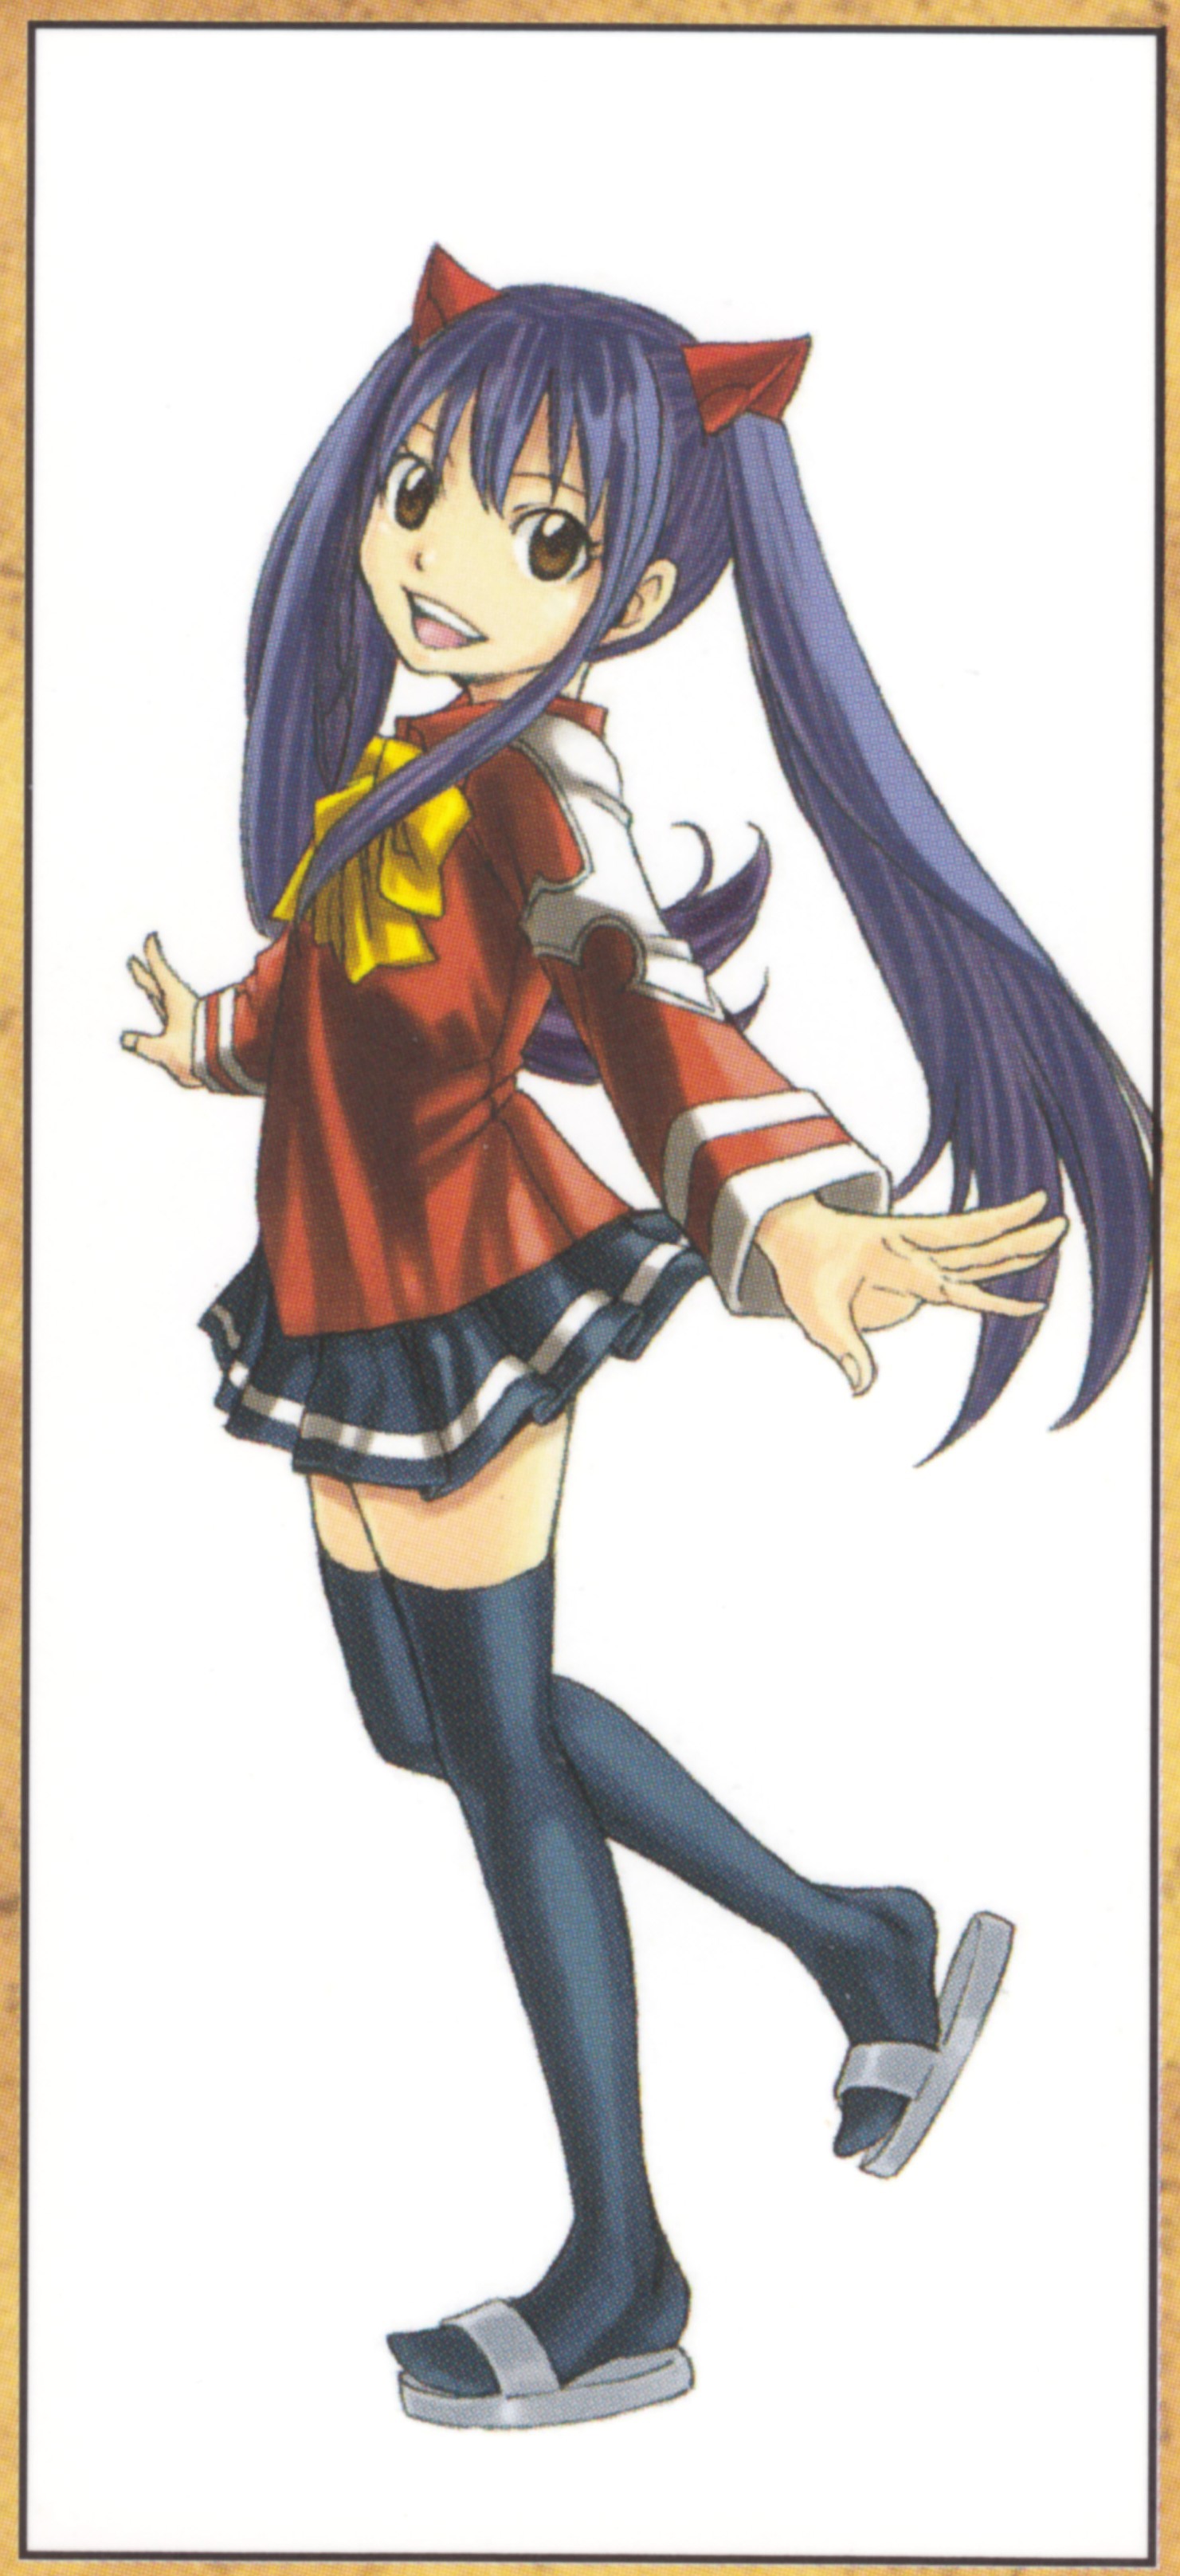 1481x3232 Wendy Marvell download Wendy Marvell image